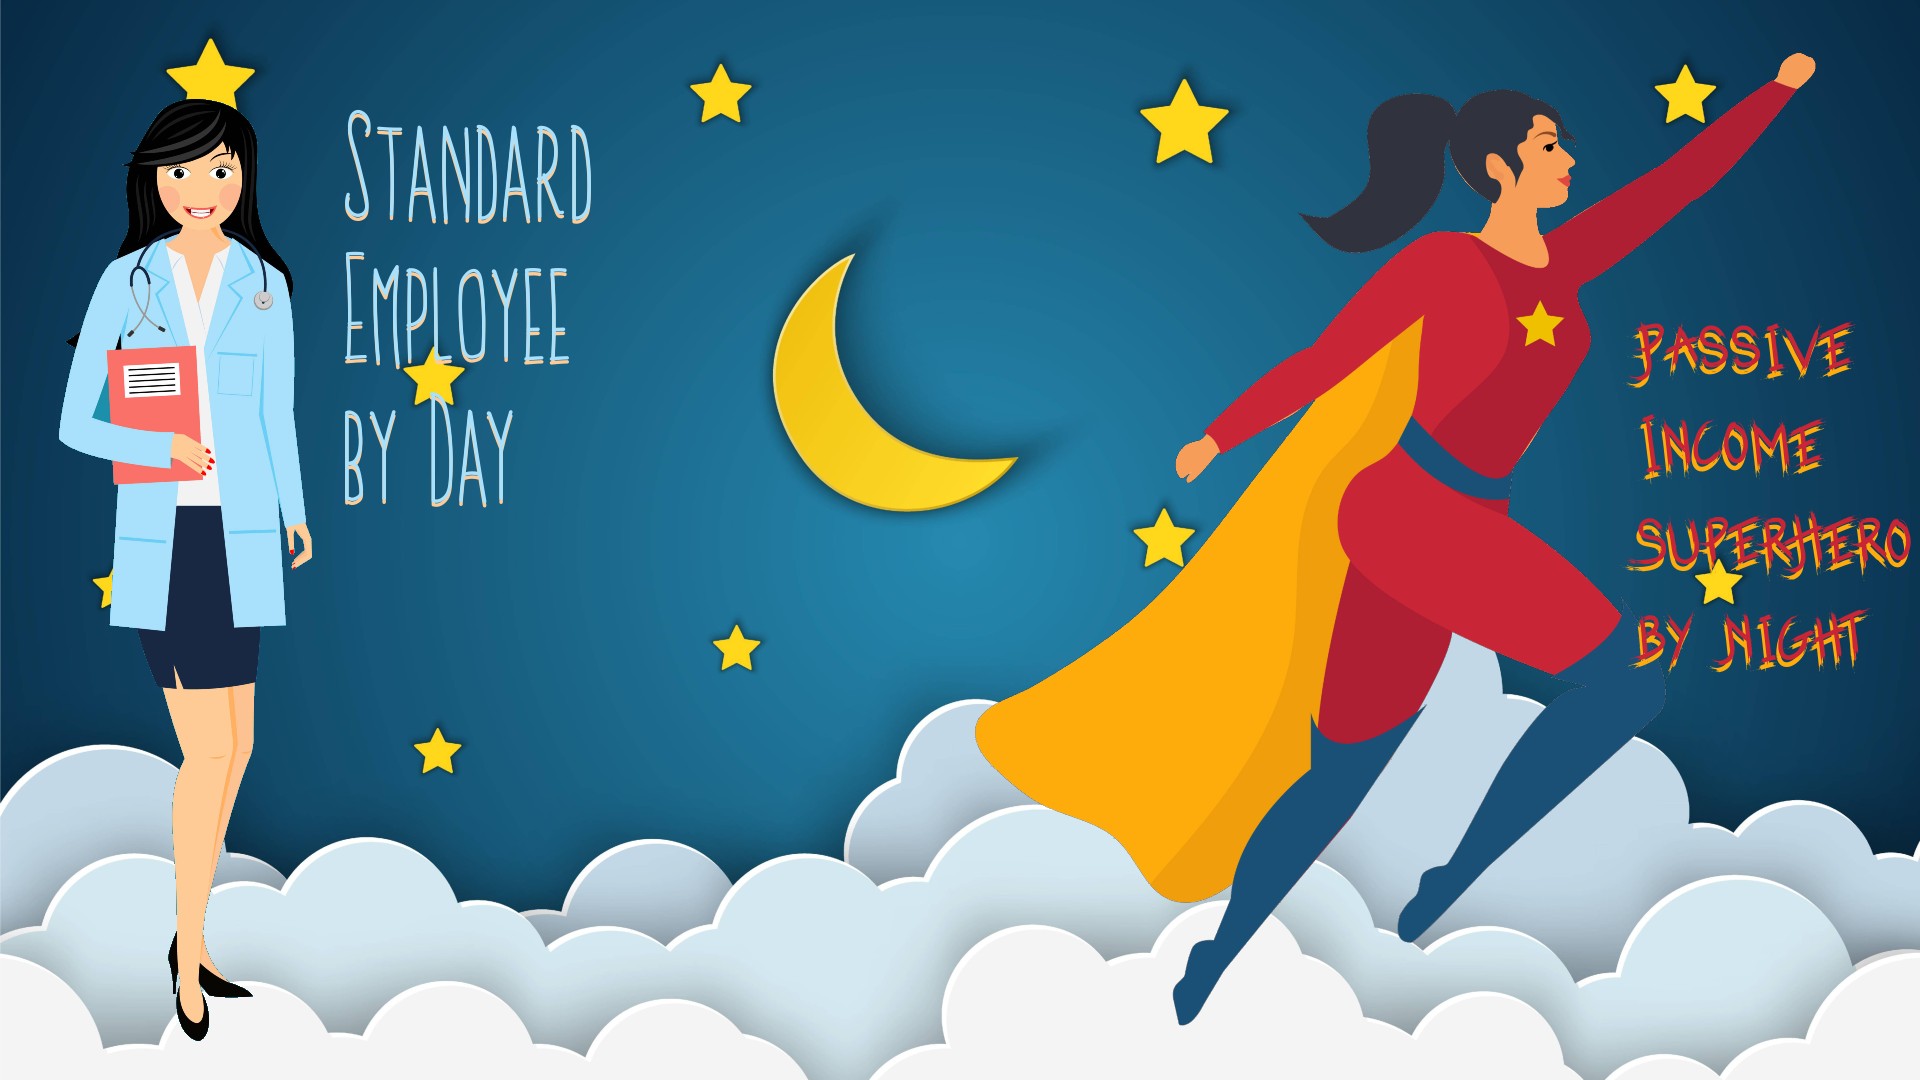 Standard Employee by Day, Passive Income Superhero by Night